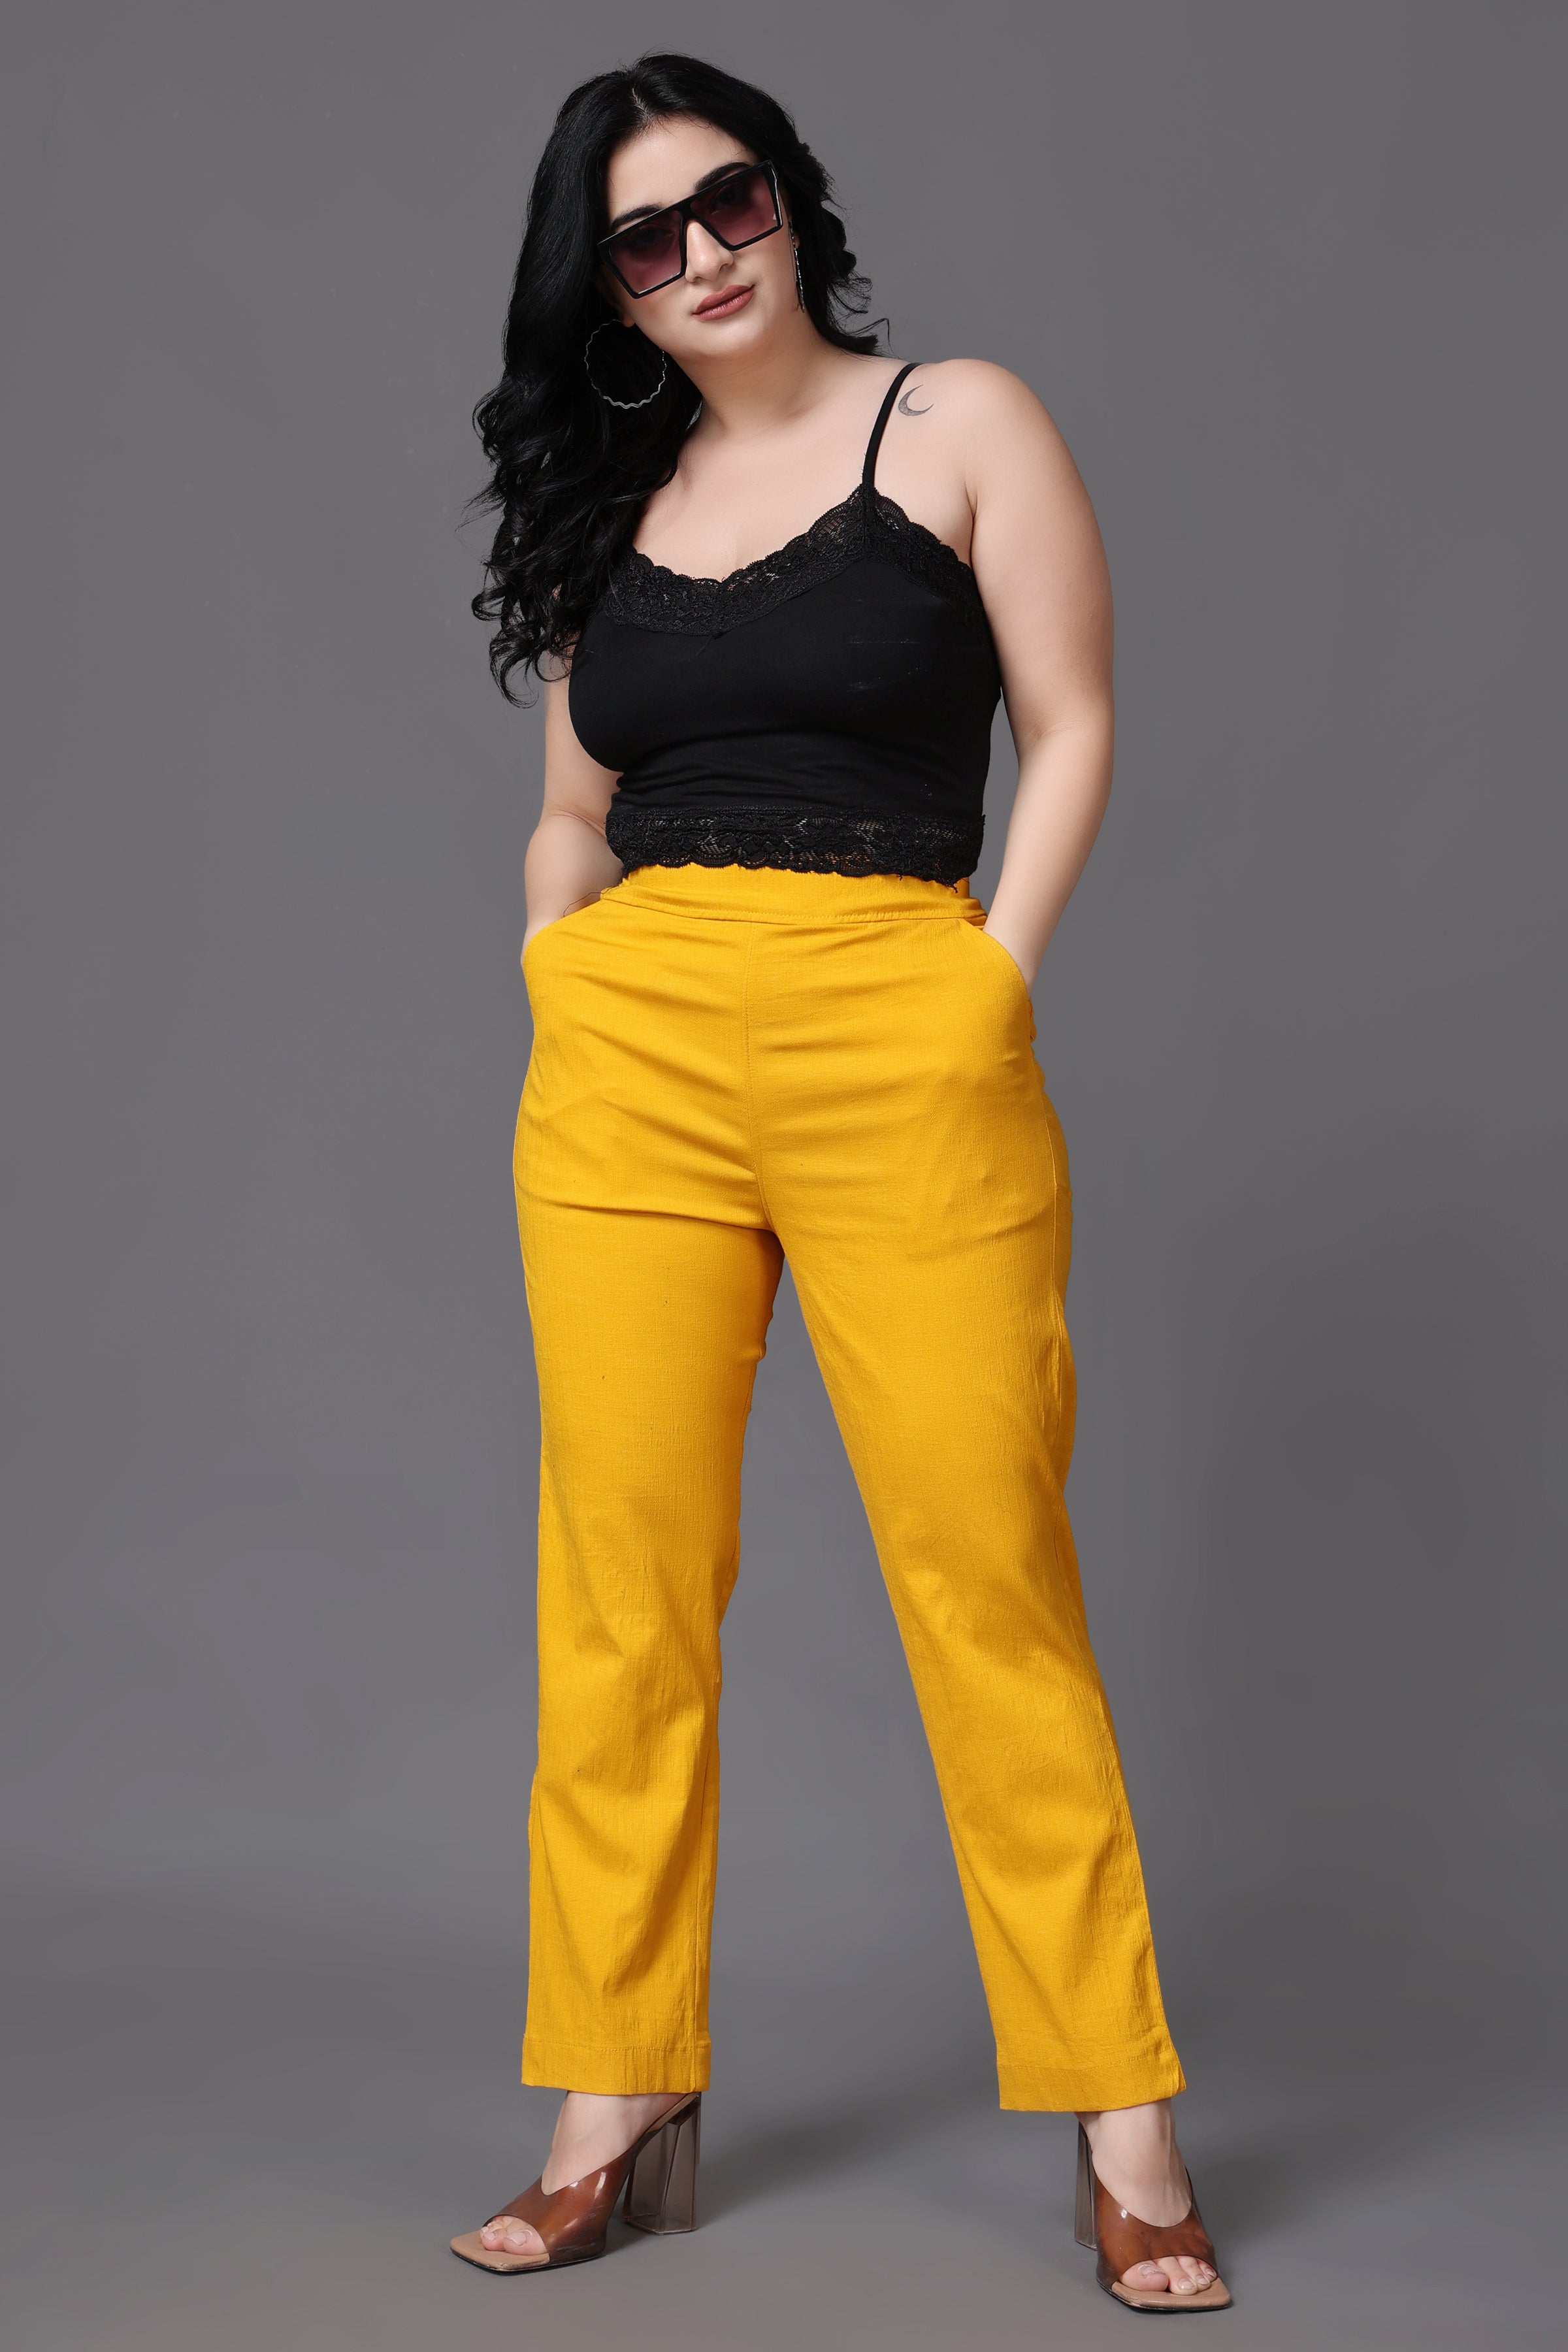 Shimmering Shirred Crop Top And Pocket Design Palazzo Pants Matching Set  Set Wide Leg, Solid Color Sleeveles, Perfect For Spring And Summer Fashion  From Yunini, $34.89 | DHgate.Com